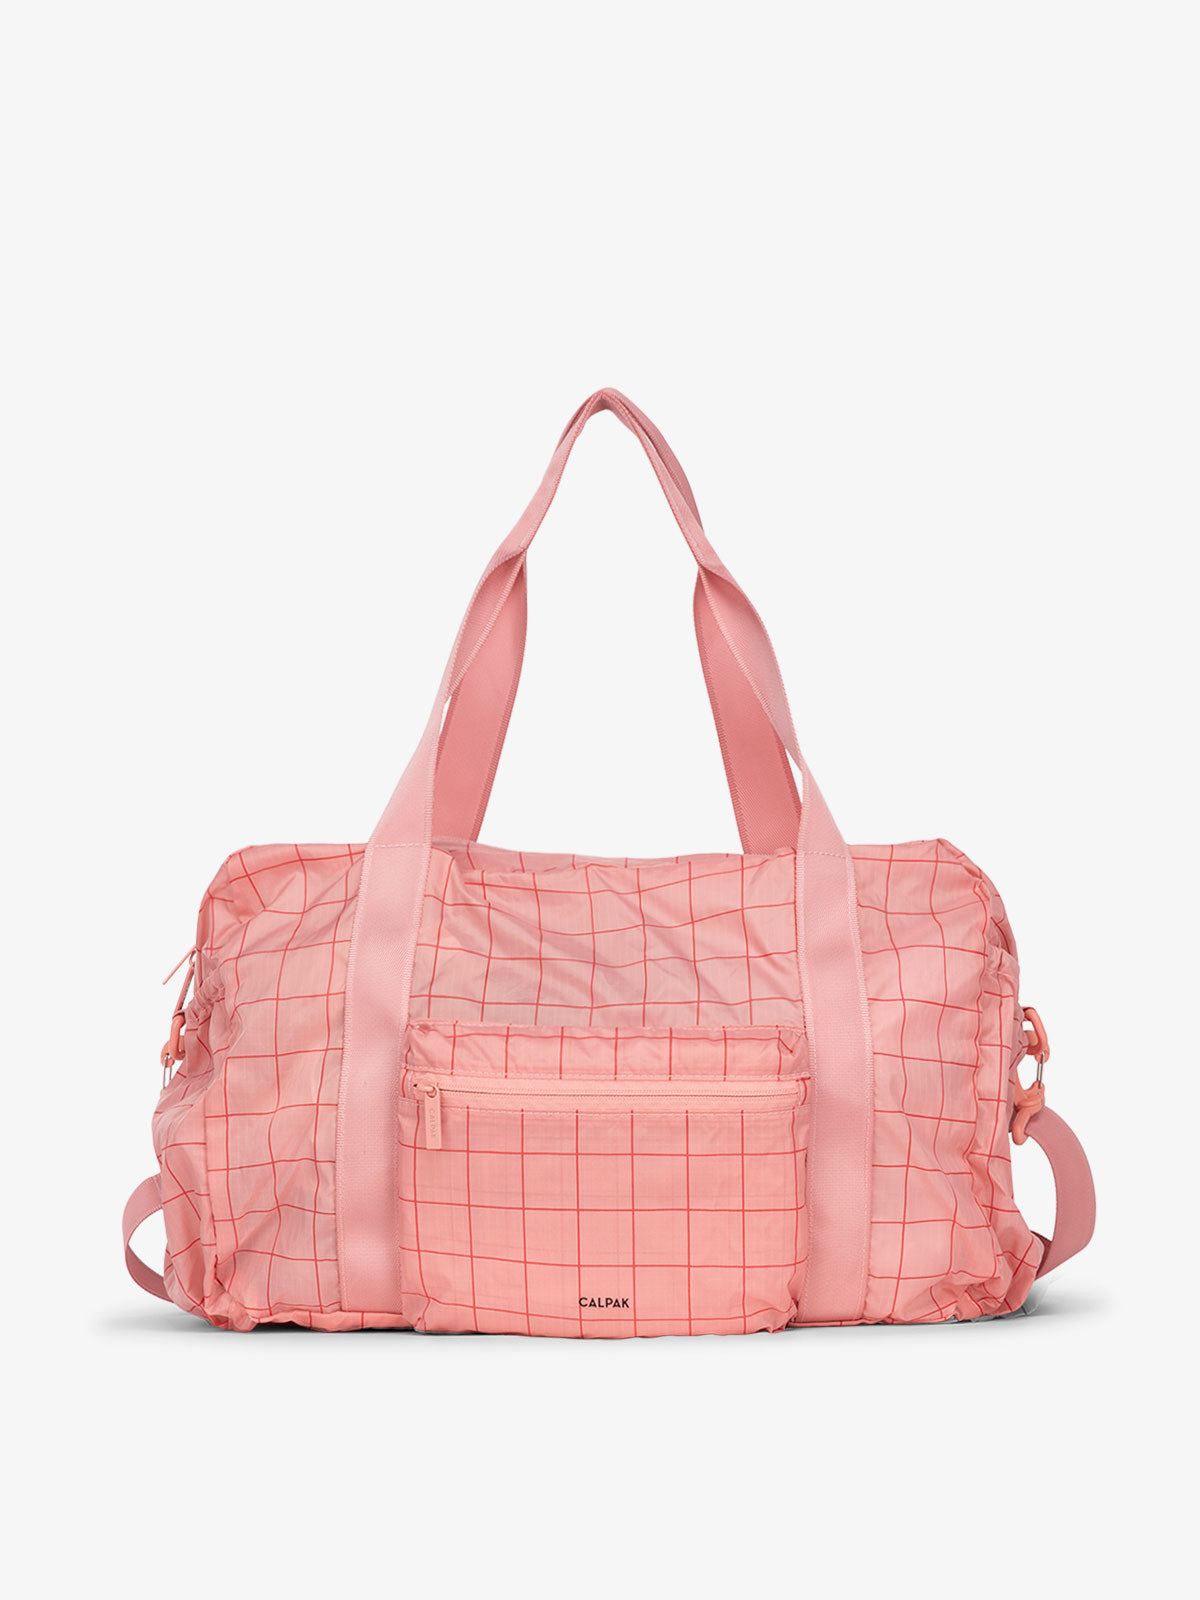 CALPAK Compakt duffel bag with removable crossbody strap and water resistant fabric in pink grid